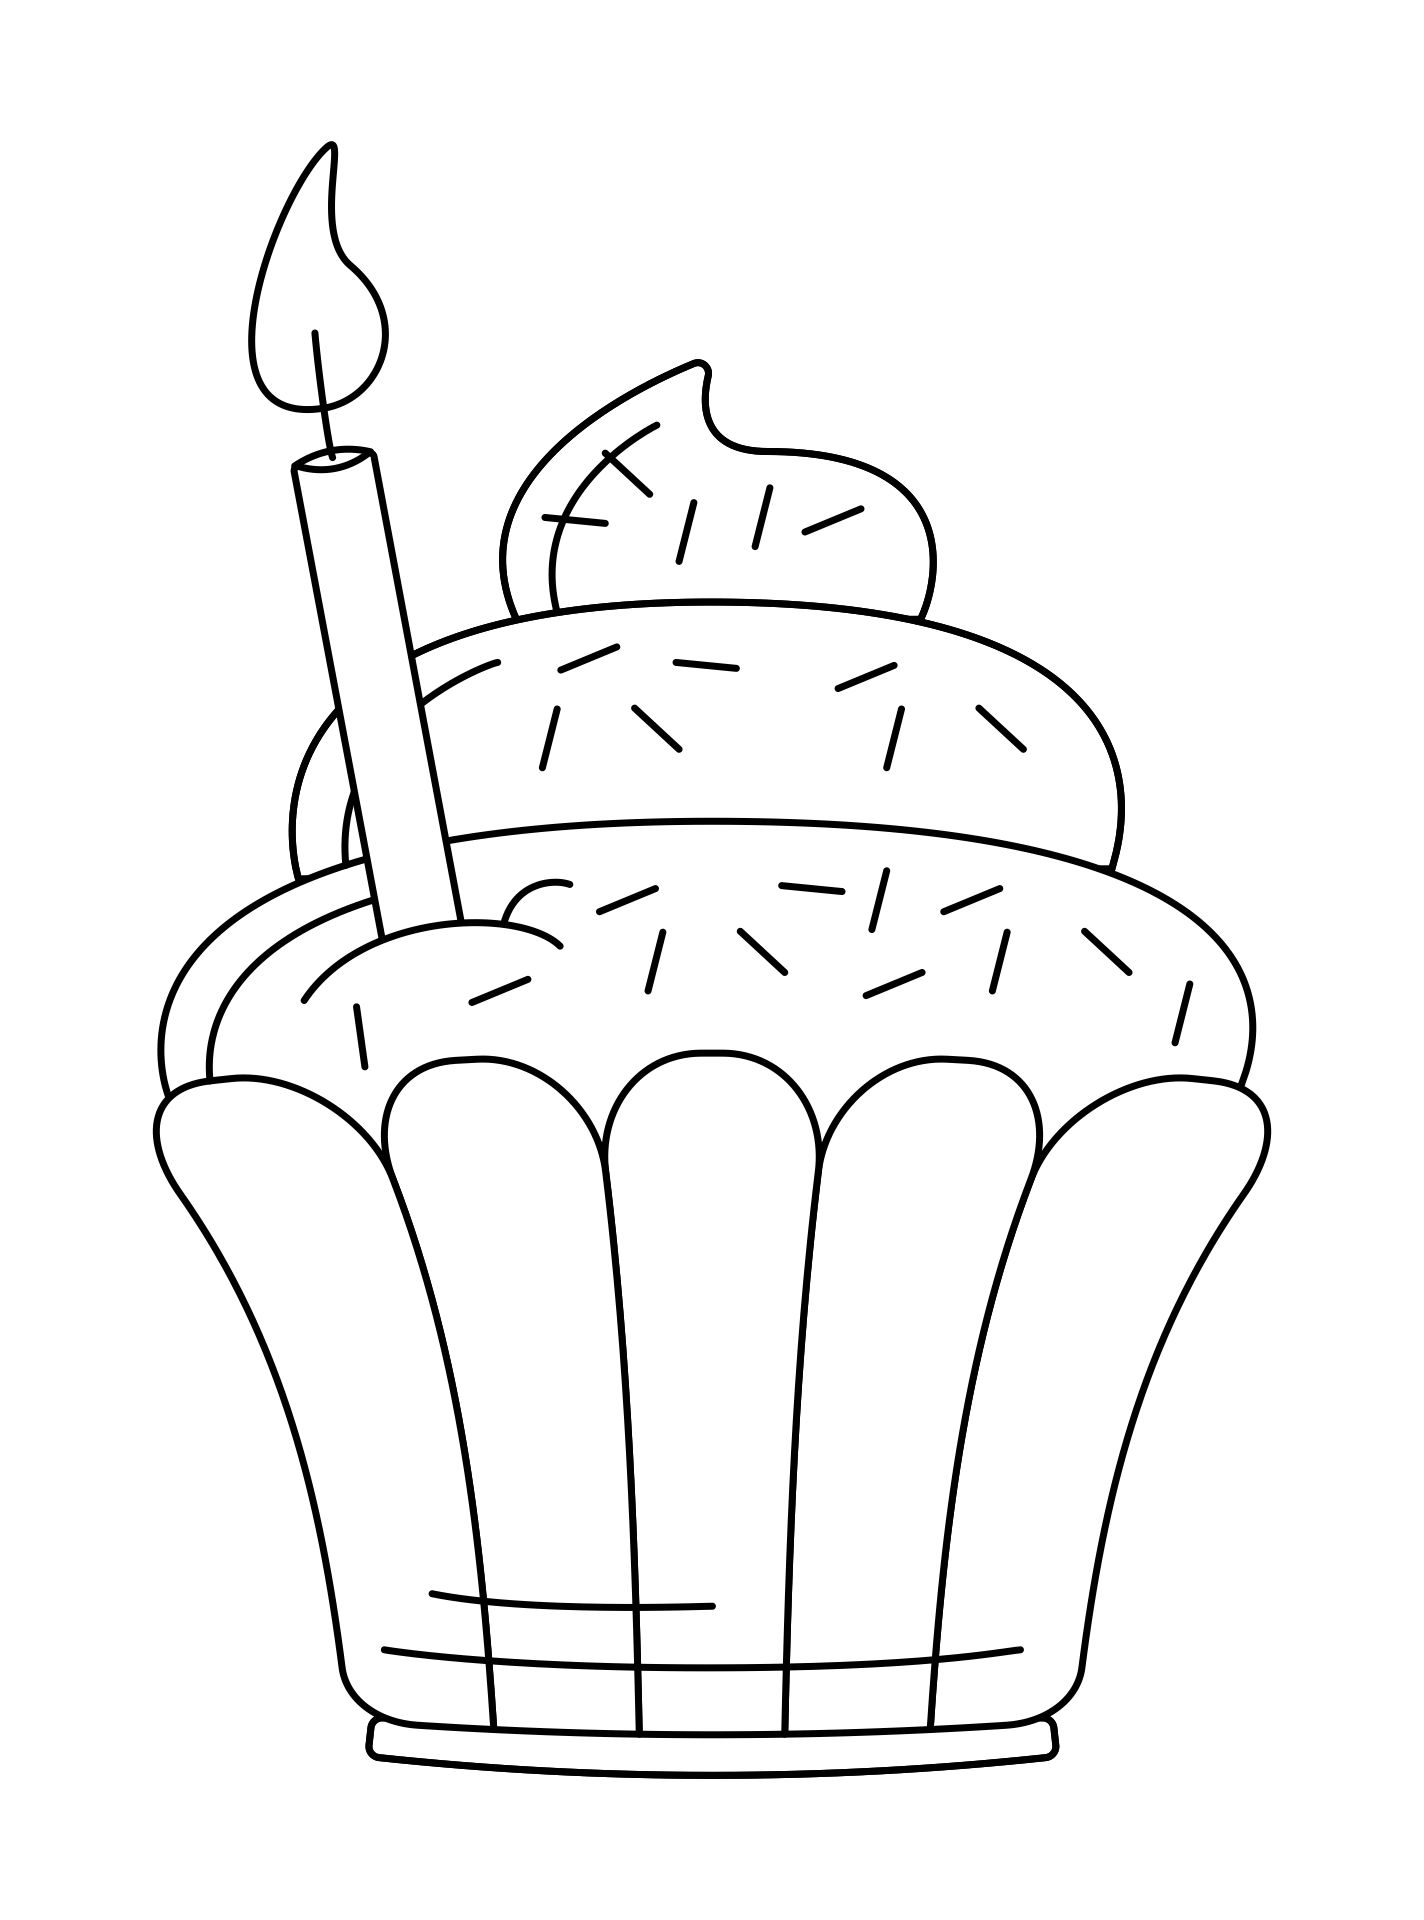 Cupcake Outline Cake Celebration Christmas Cupcake - Muffins Birthday Cake  PNG Image With Transparent Background | TOPpng